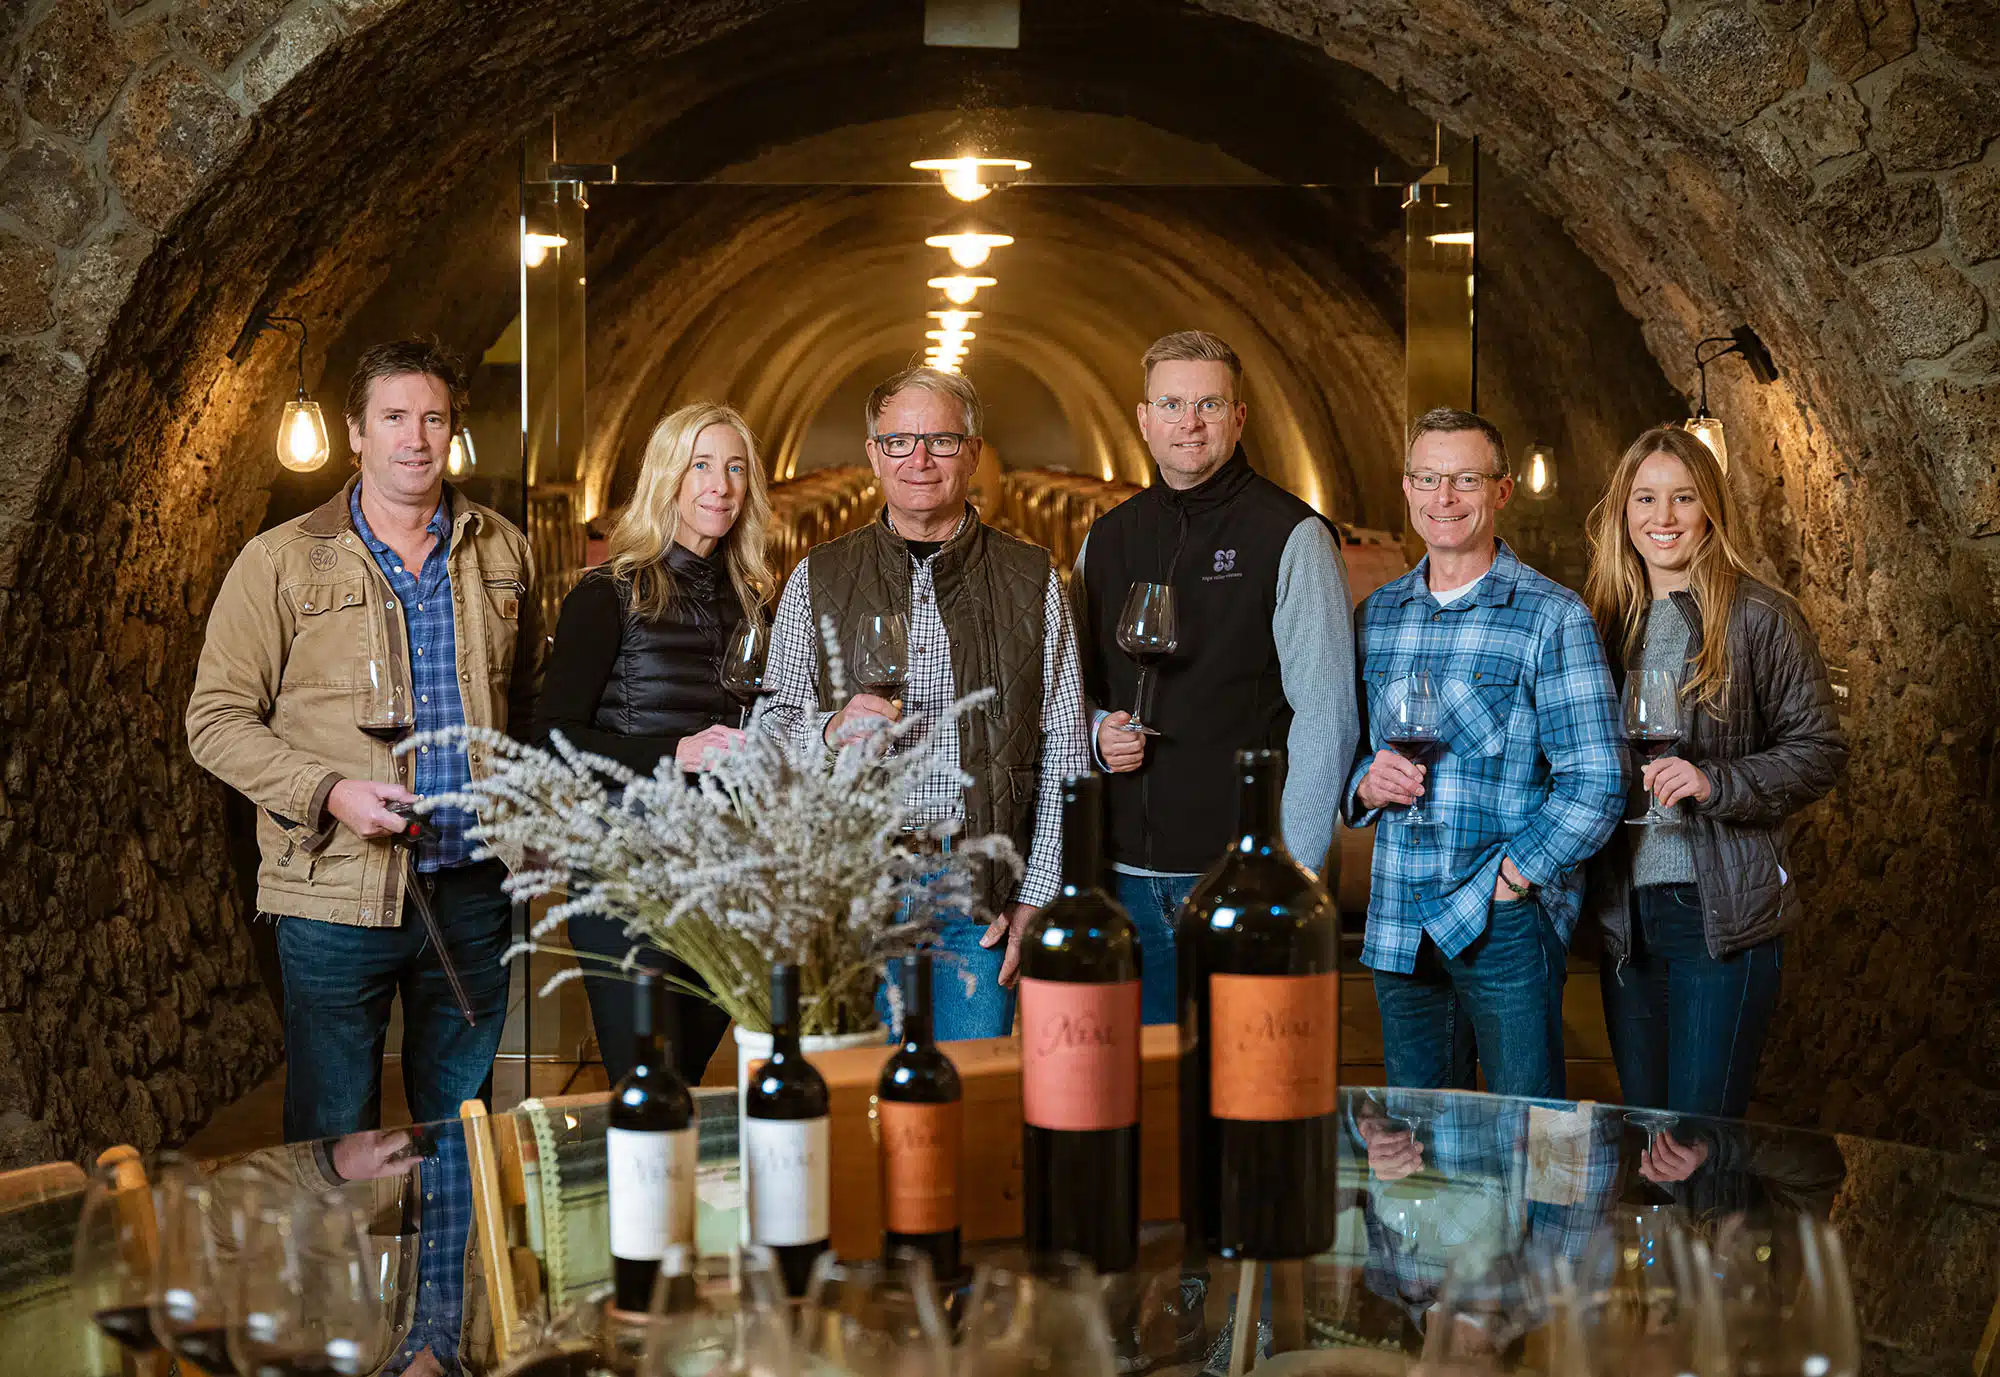 Meet the family behind our certified organic vineyards and wines